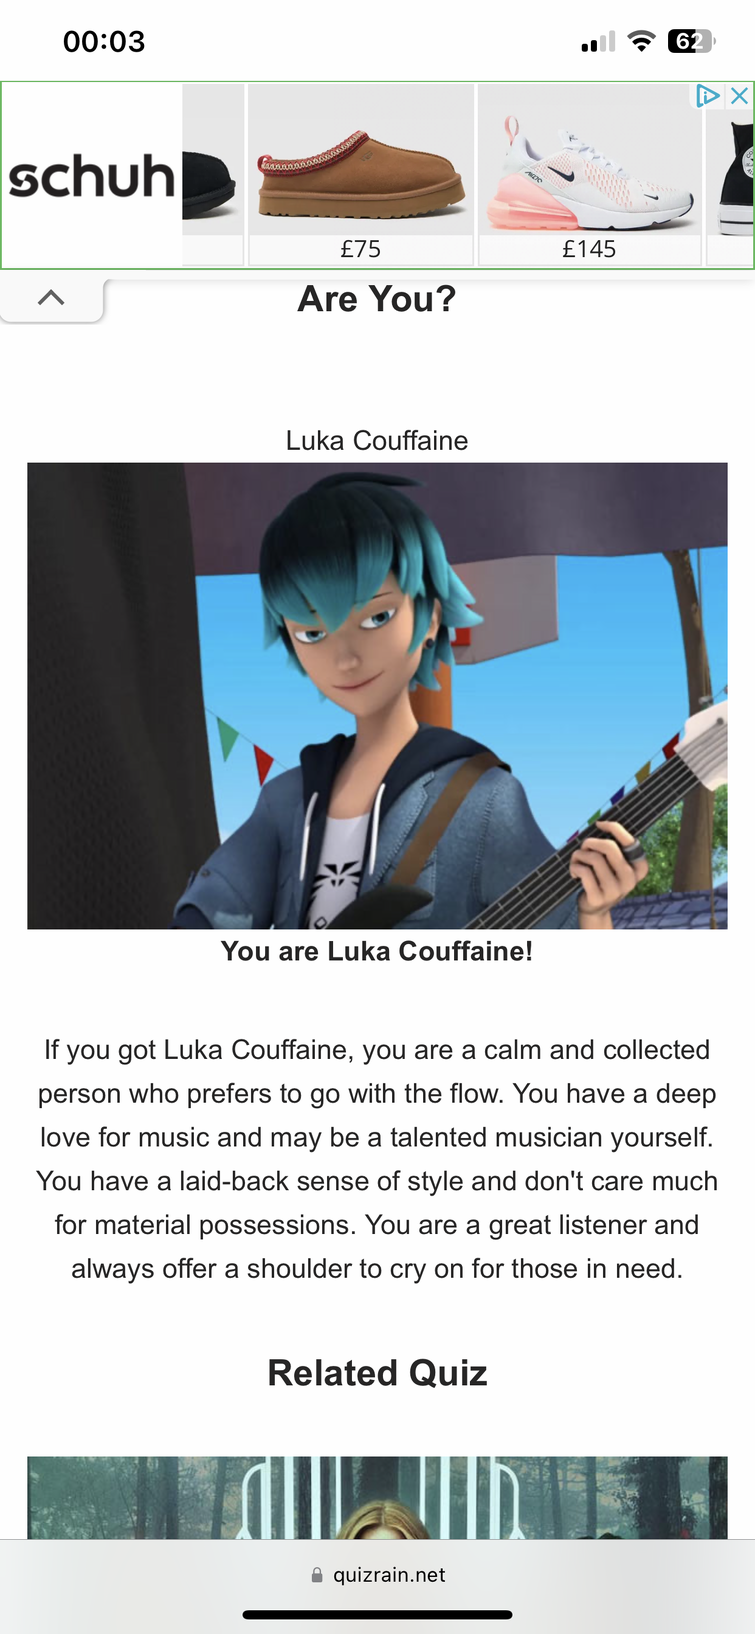 Miraculous Ladybug: Which Character Are You? - Animation - QuizRain